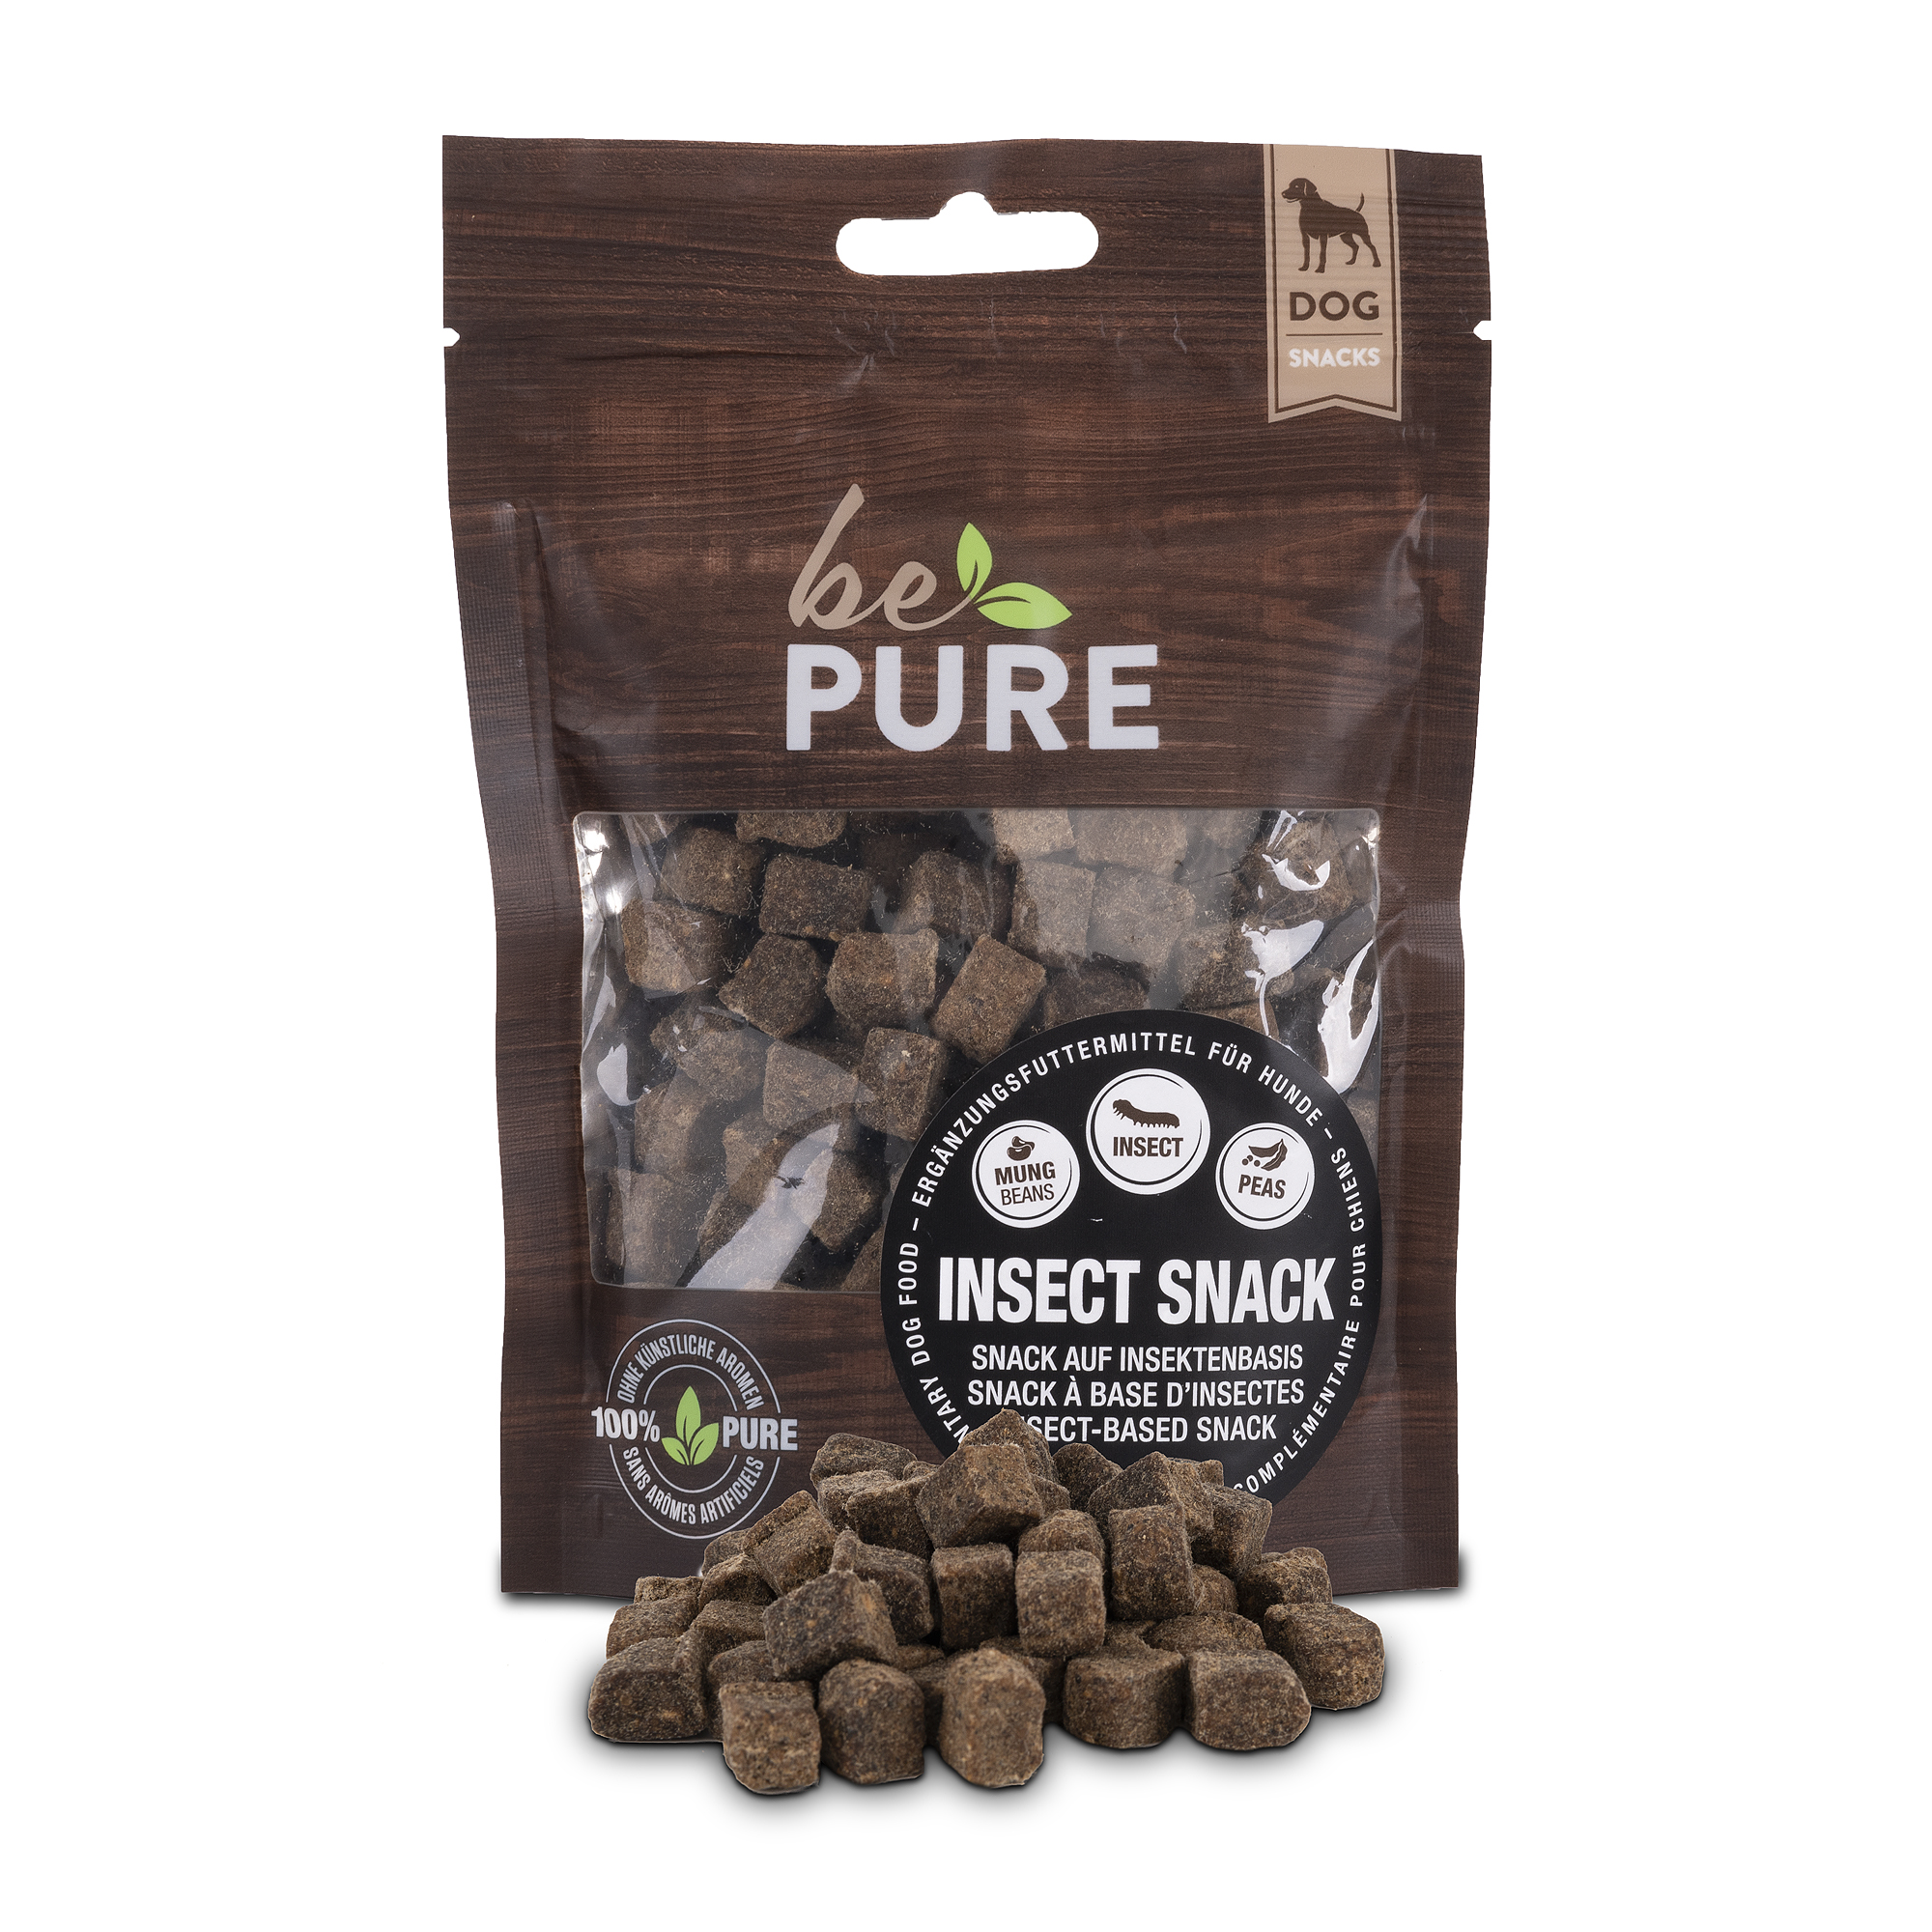 bePure Insect Snack für Hunde (100g)